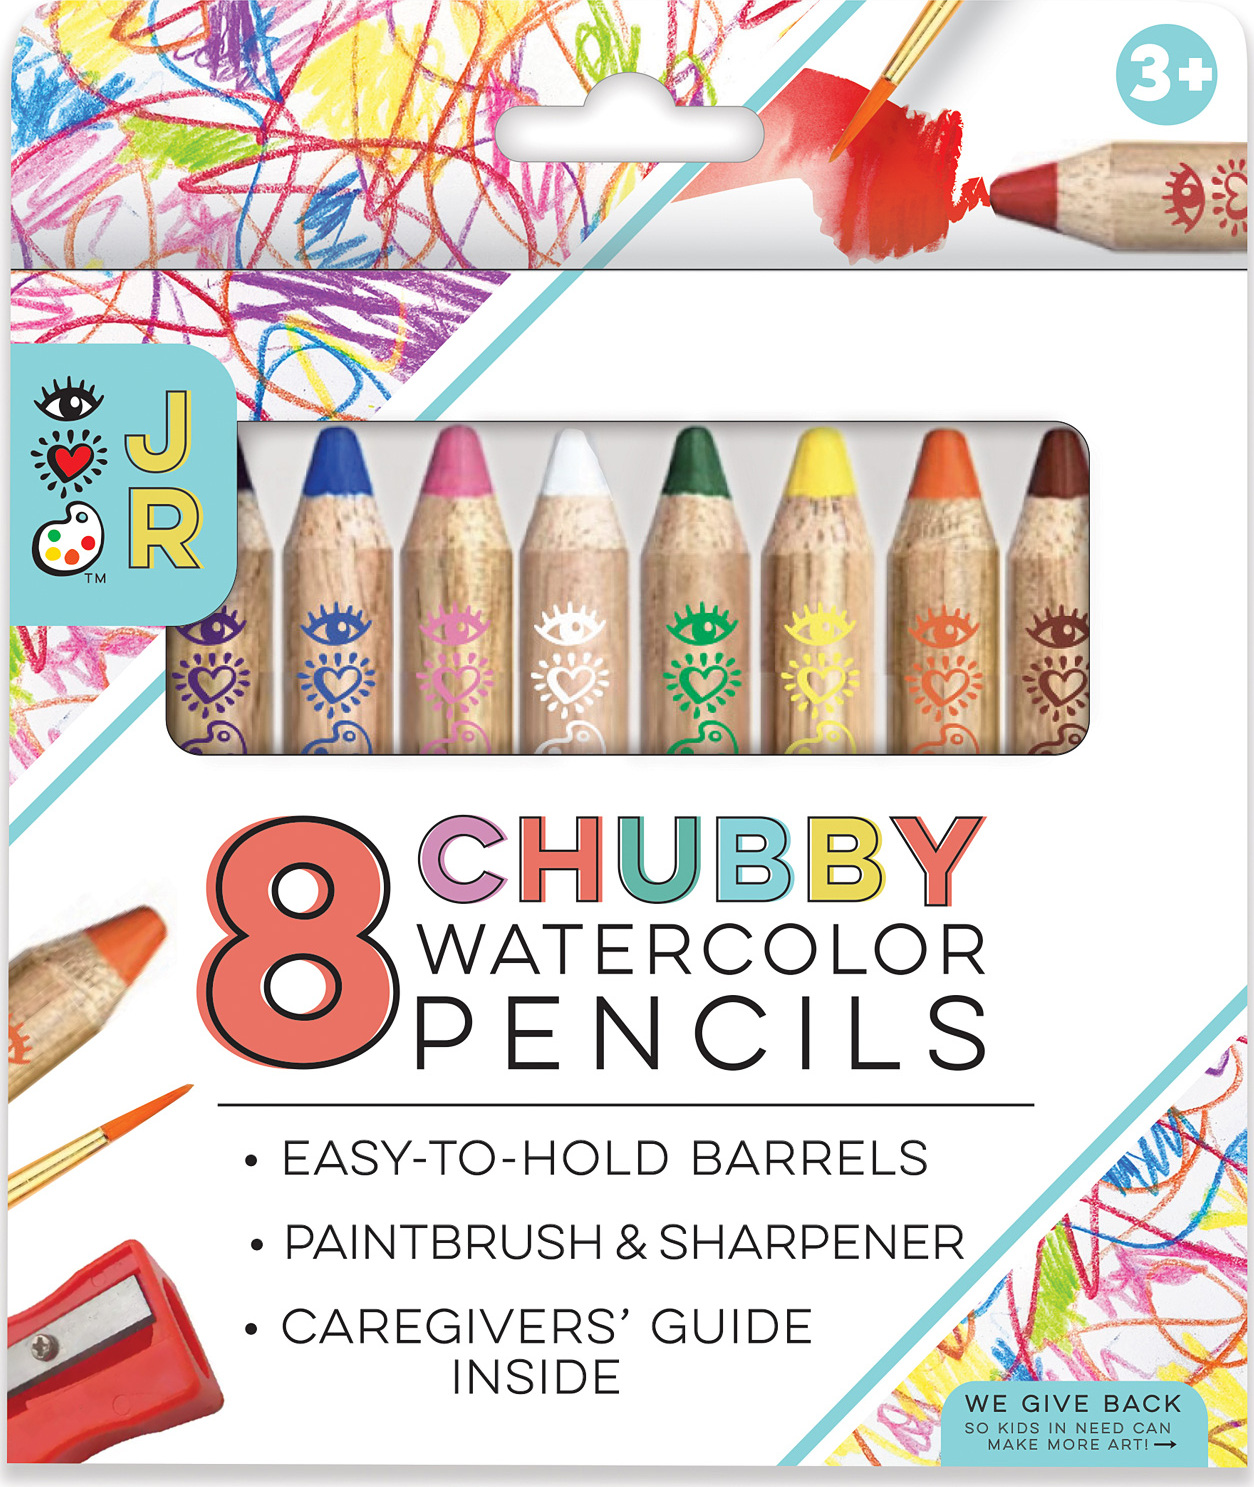 8 Chubby Watercolor Pencils